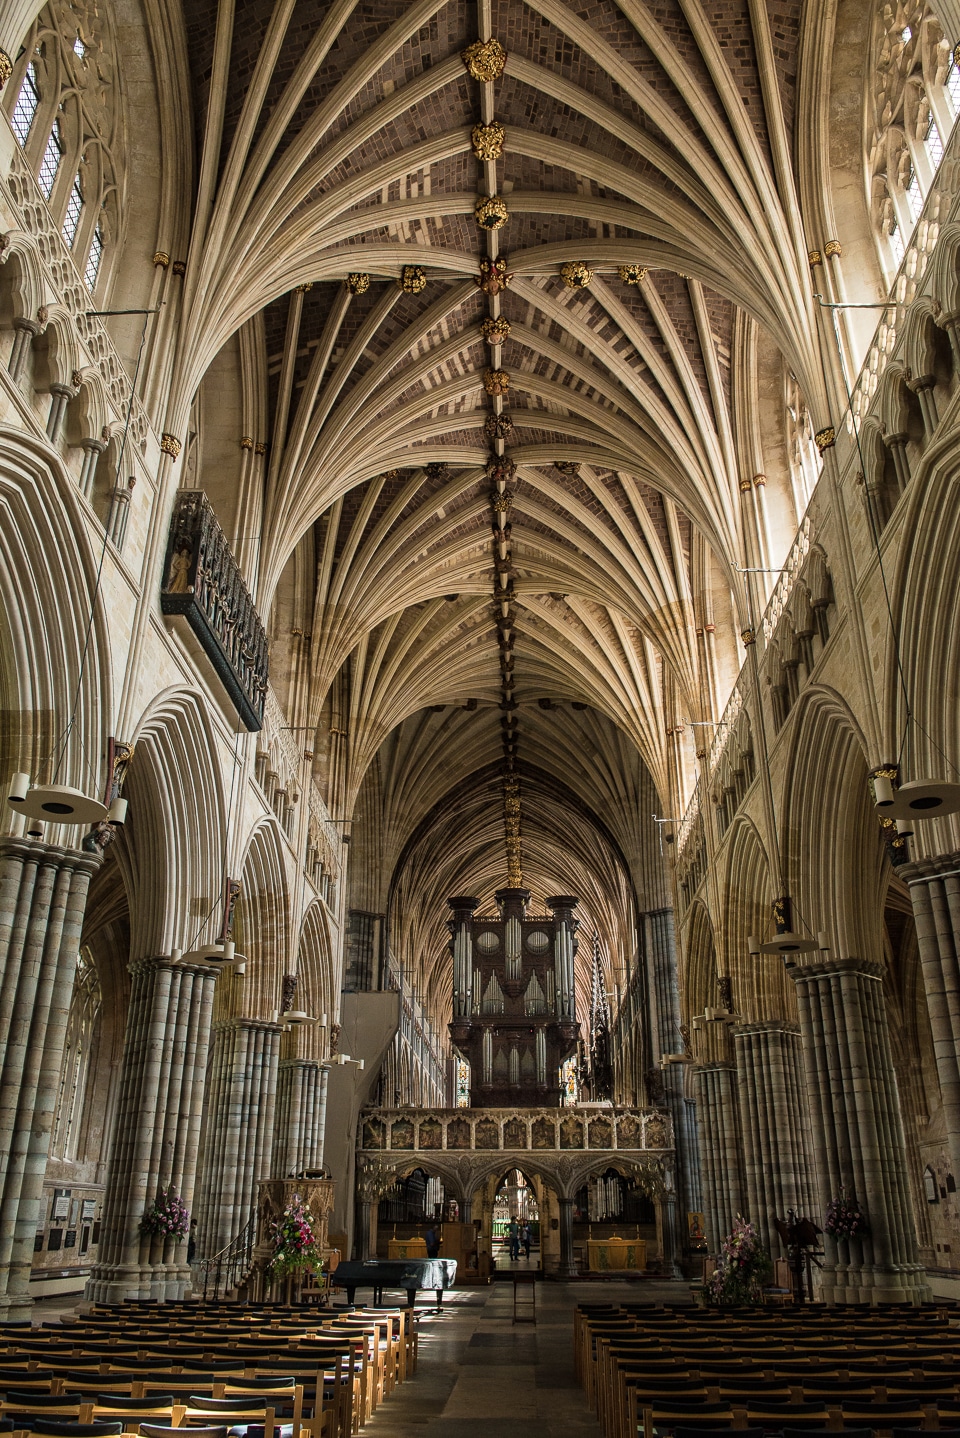 Exeter Cathedral, England - Travel Past 50